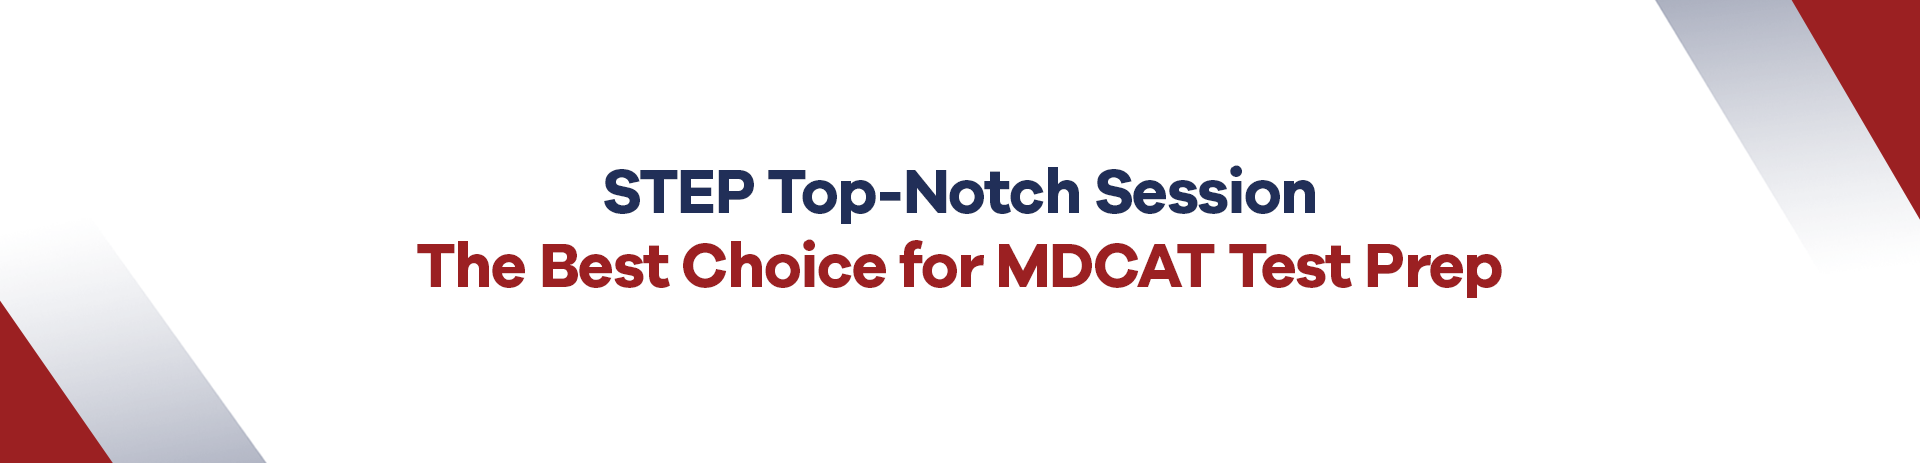 STEP Top-Notch the best choice for MDCAT